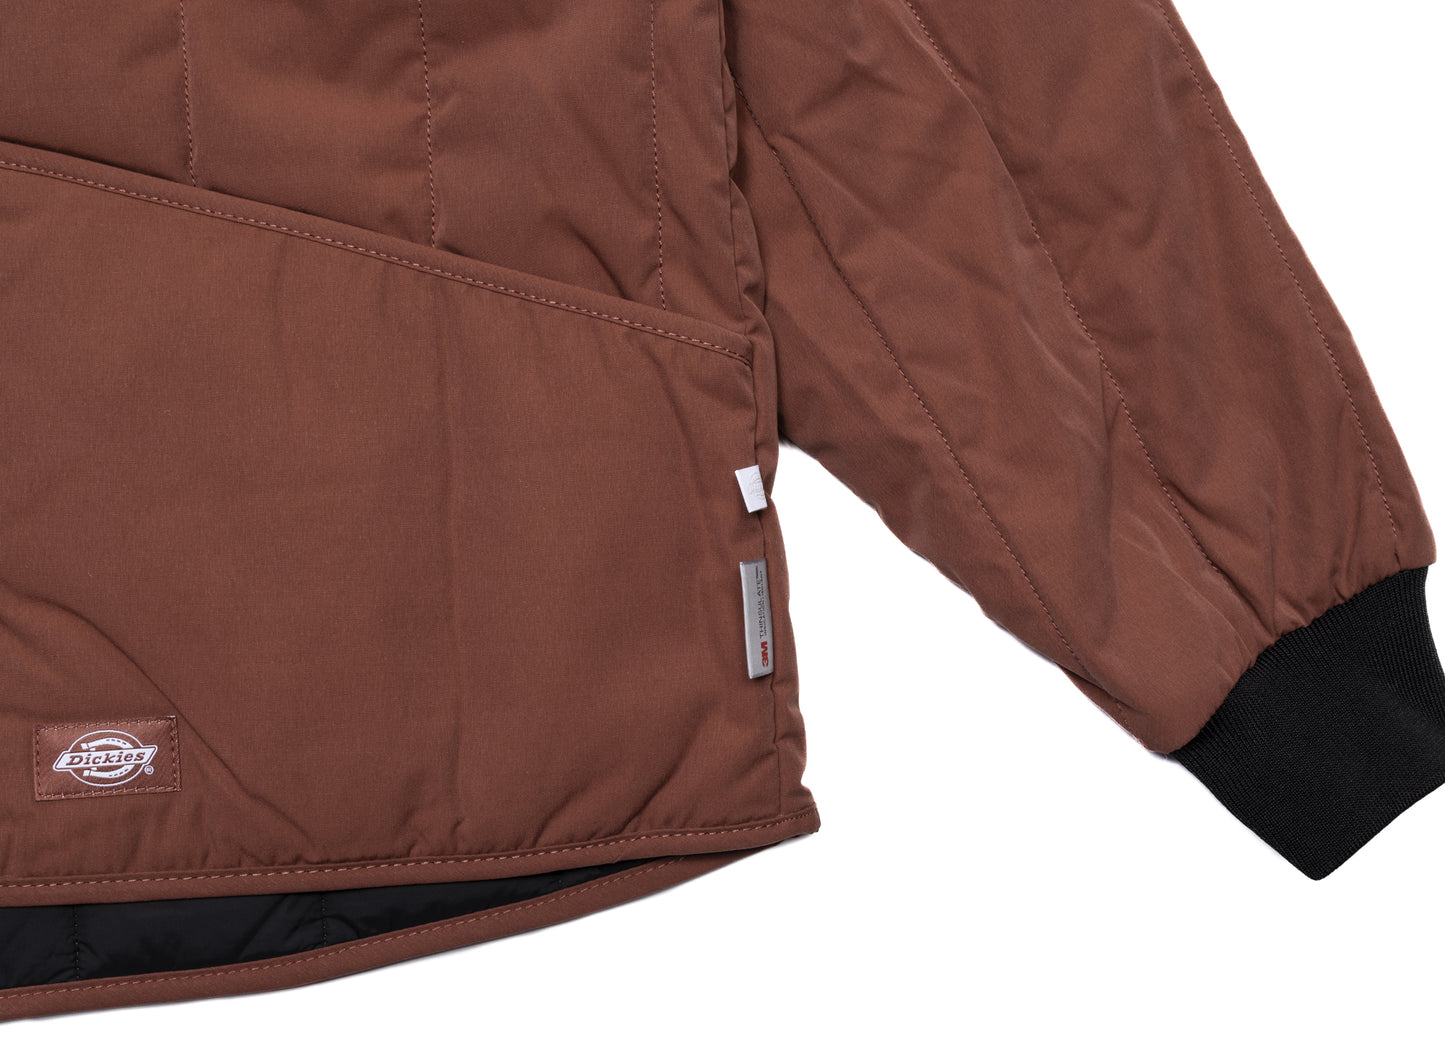 Dickies Insulated Quilted Jacket in Mahogany